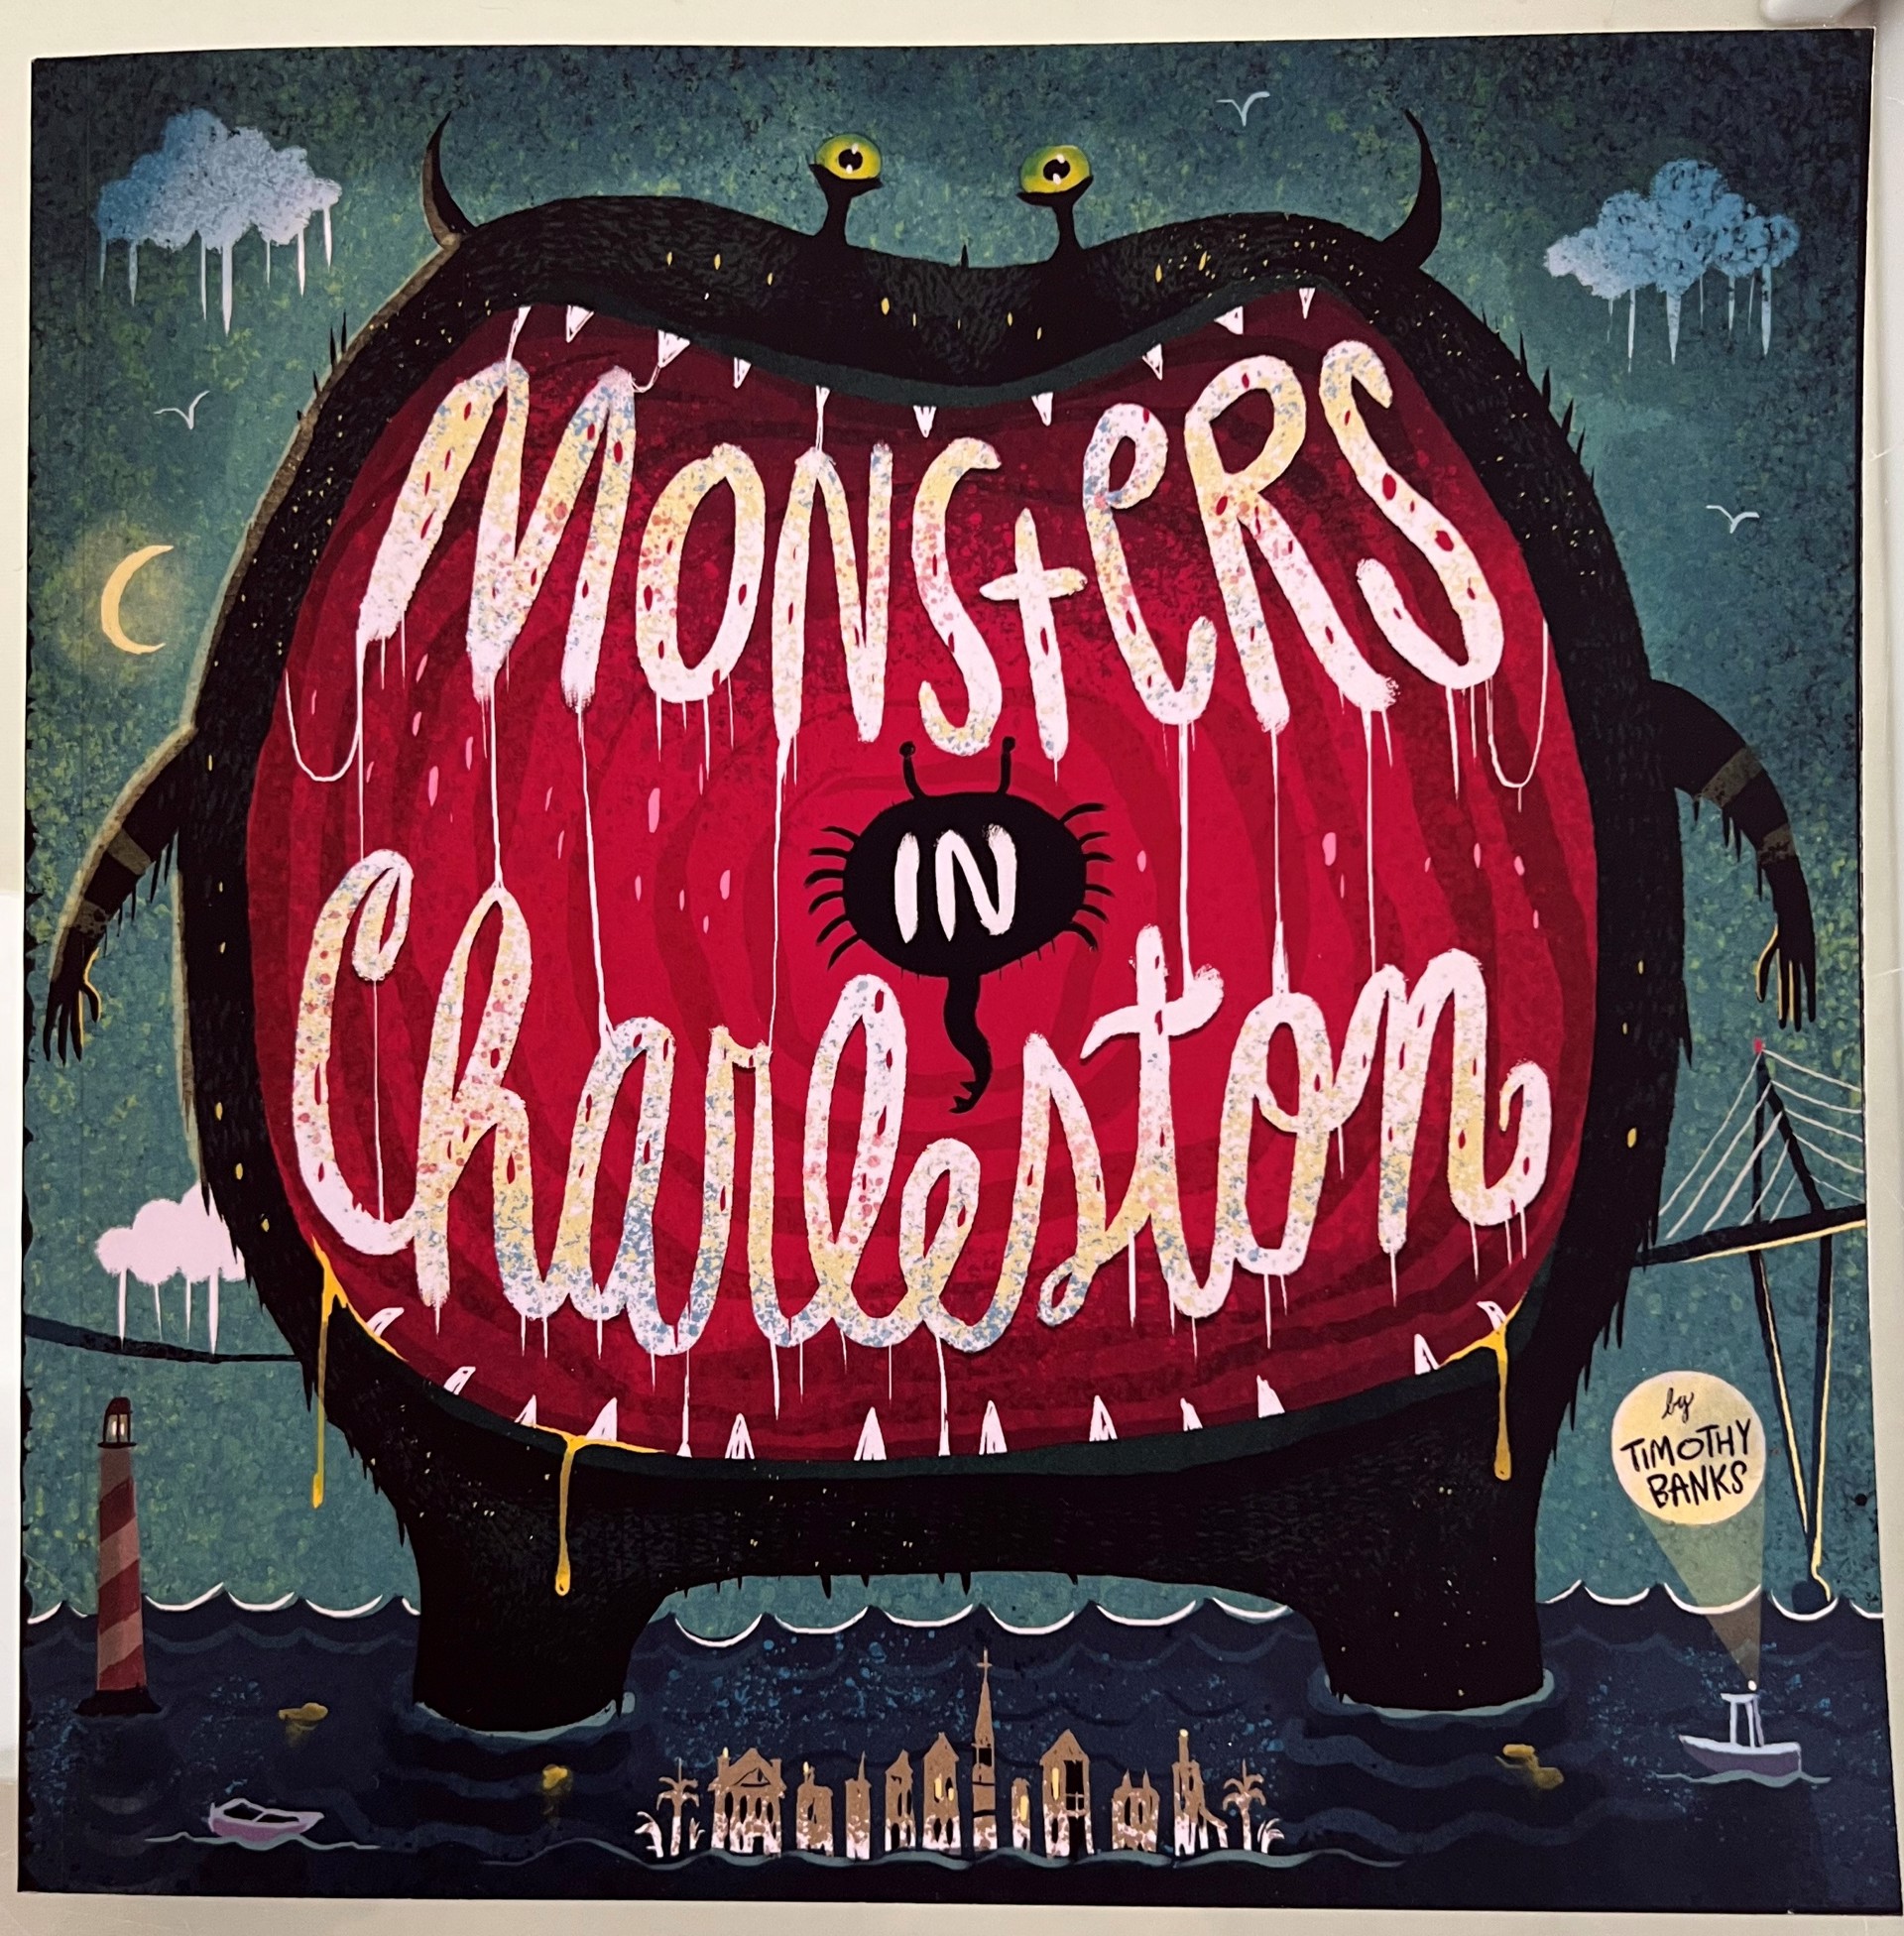 Monsters in Charleston - Book by Timothy Banks